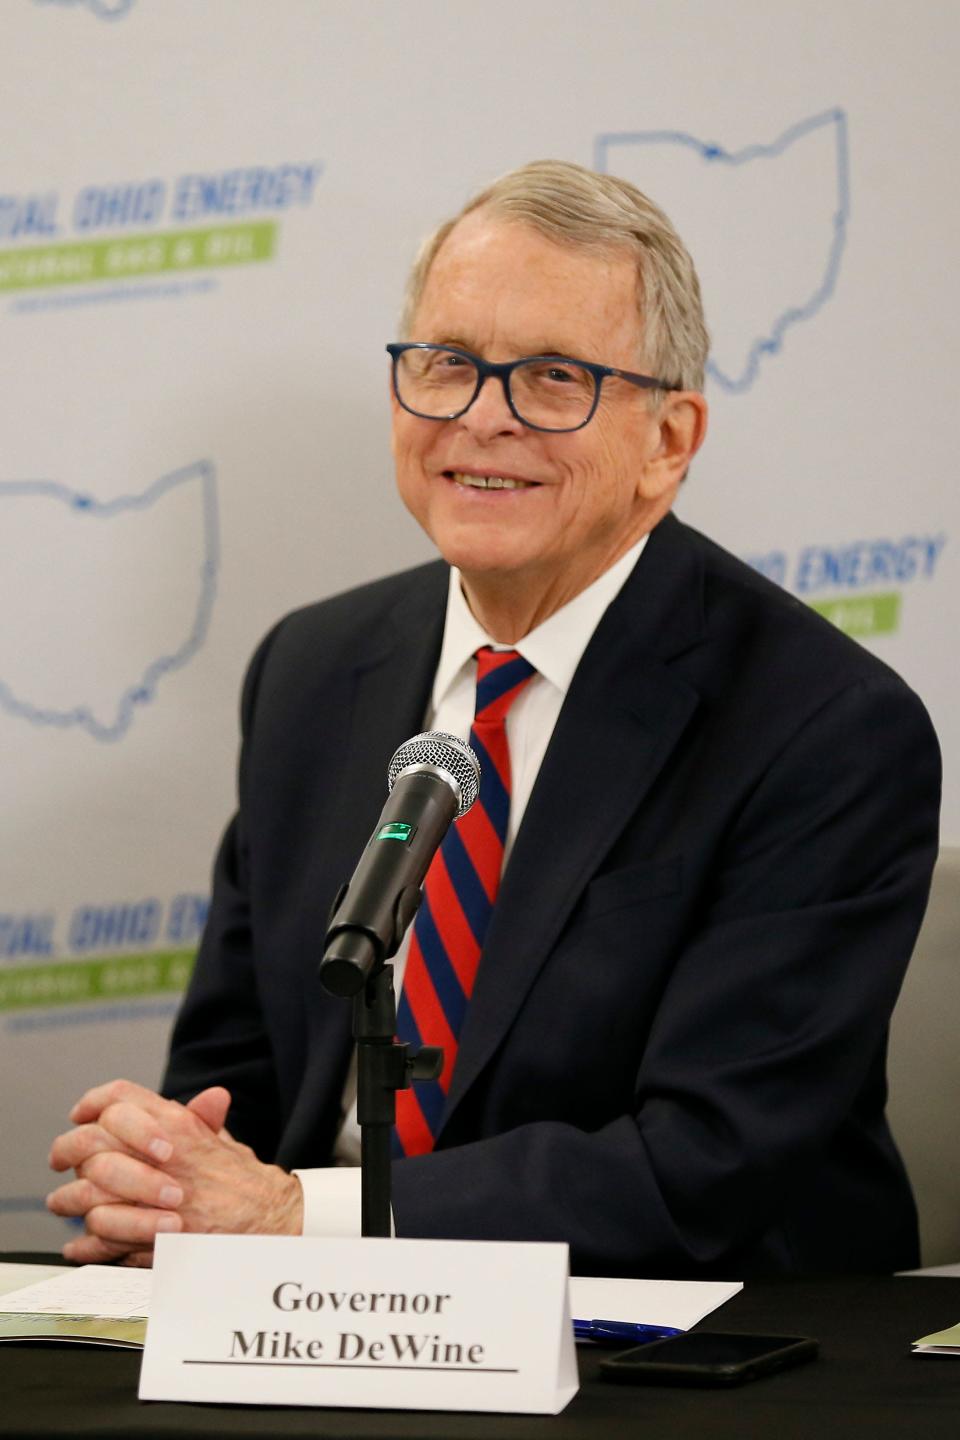 Ohio governor Mike Dewine smiles during a brief on-camera appearance before a round table discussion with members of Ohio’s natural gas and oil industry at Enerfab in the Winton Place neighborhood of Cincinnati on Thursday, June 16, 2022.